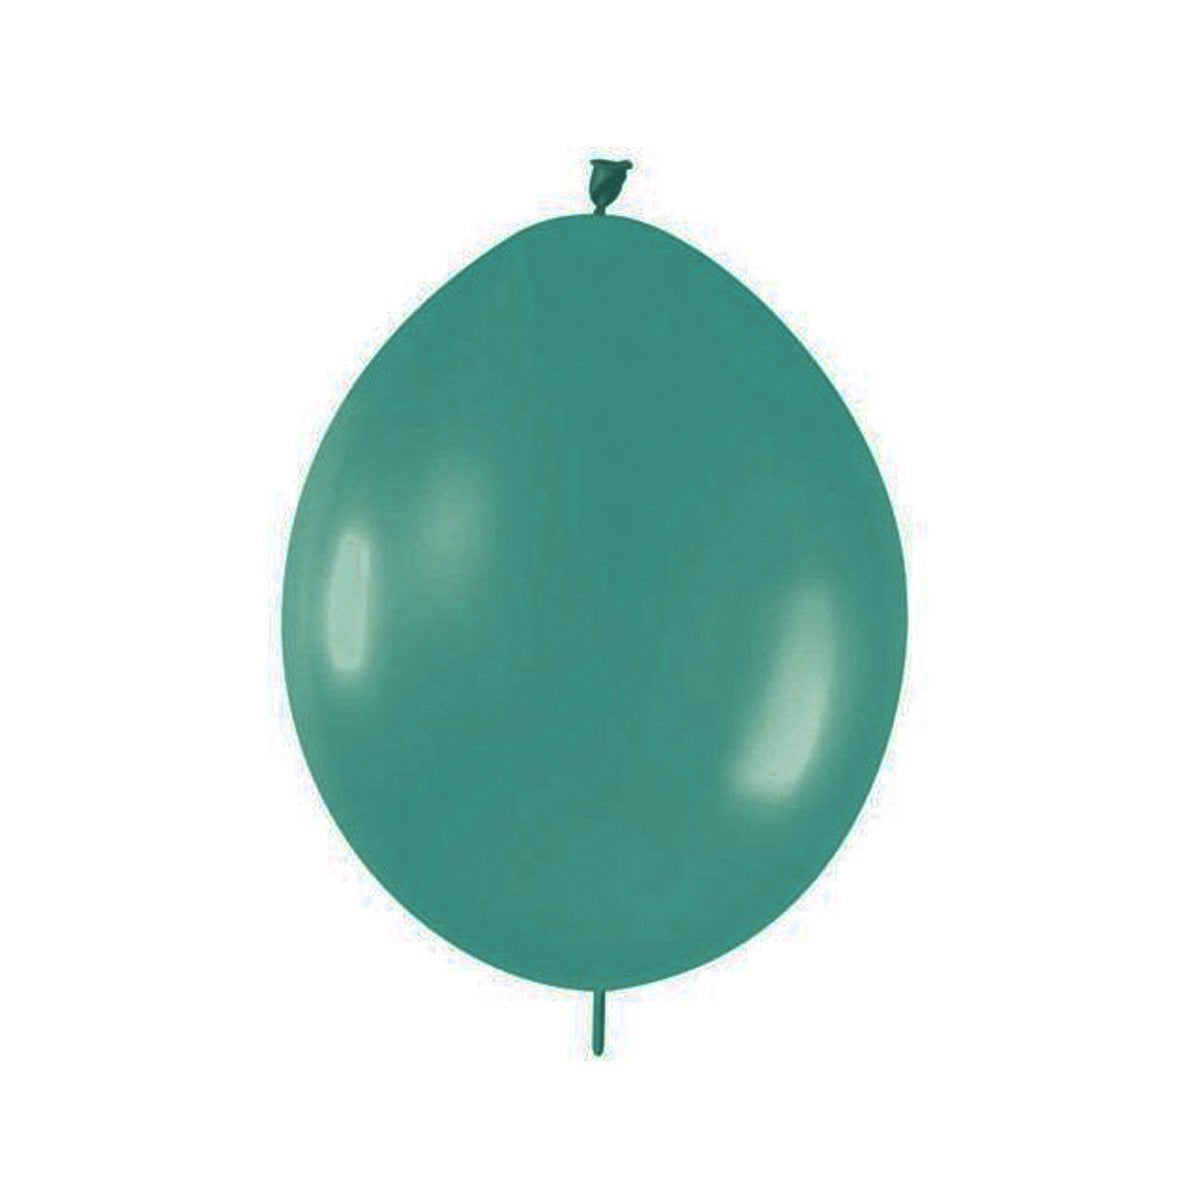 Wrapables 12 inch Latex Link-O-Loon Balloons (30 Pack)